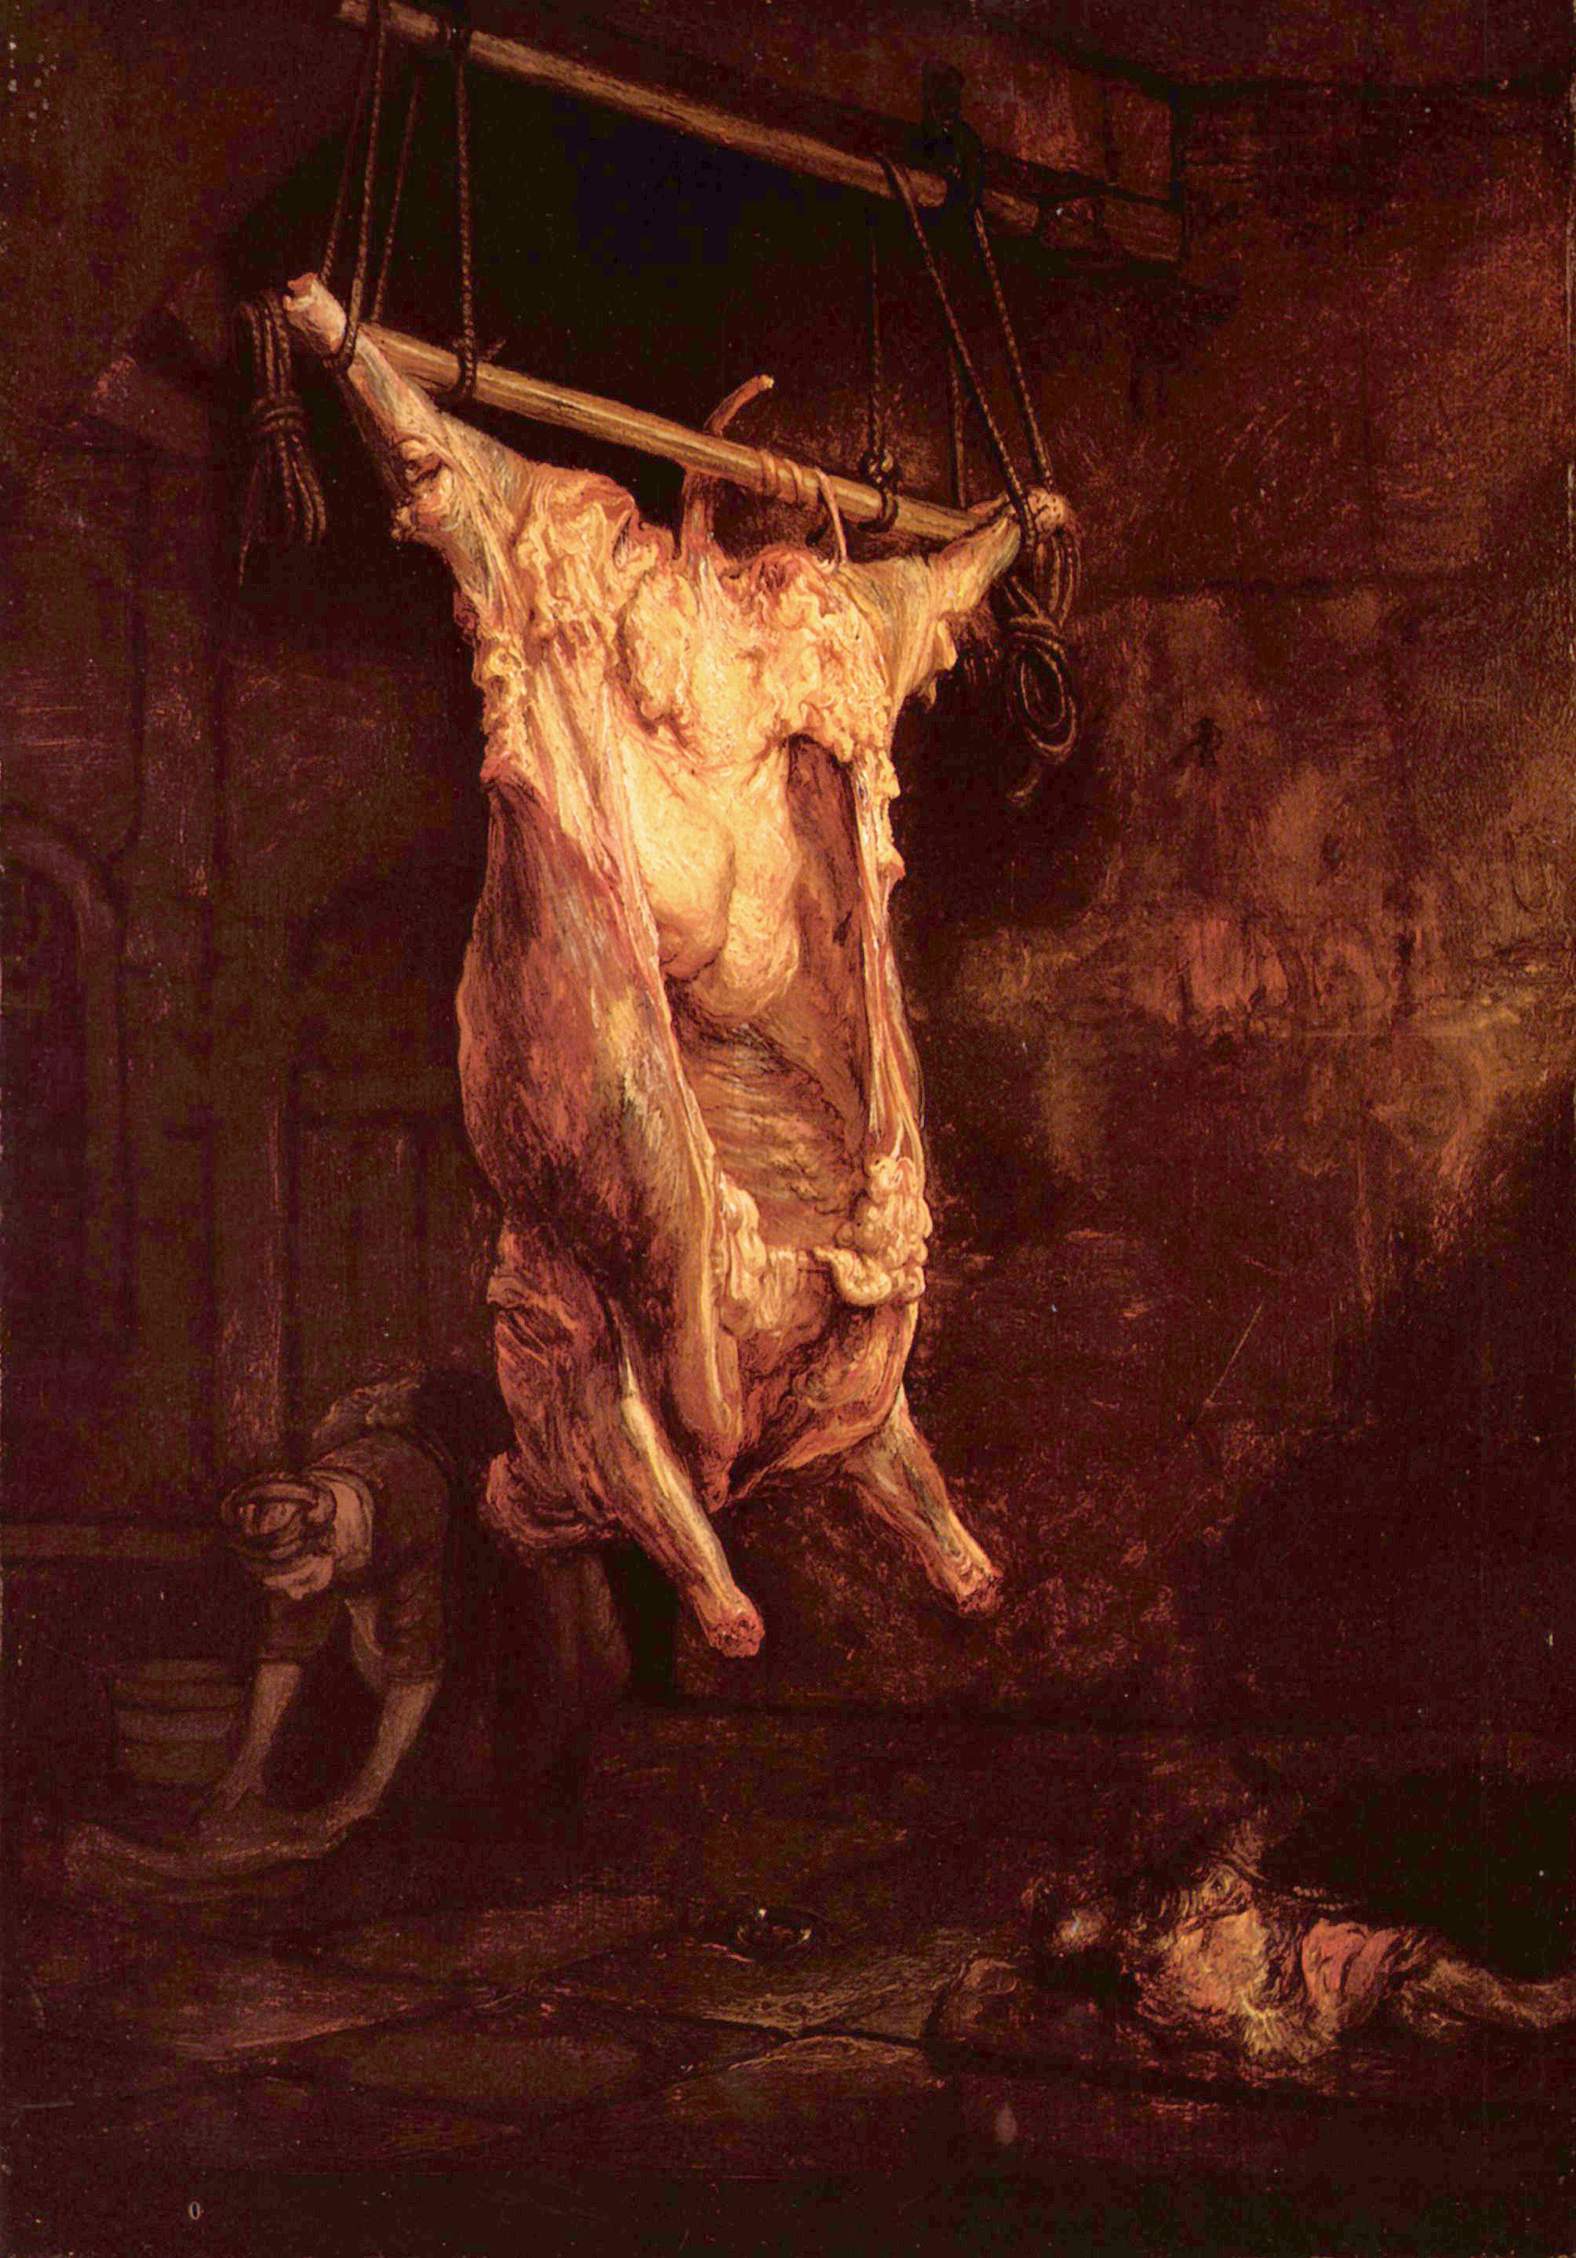 The Carcase of an Ox by Rembrandt van Rijn - c.1640–1645 - 73.3 x 51.7 cm Kelvingrove Art Gallery and Museum